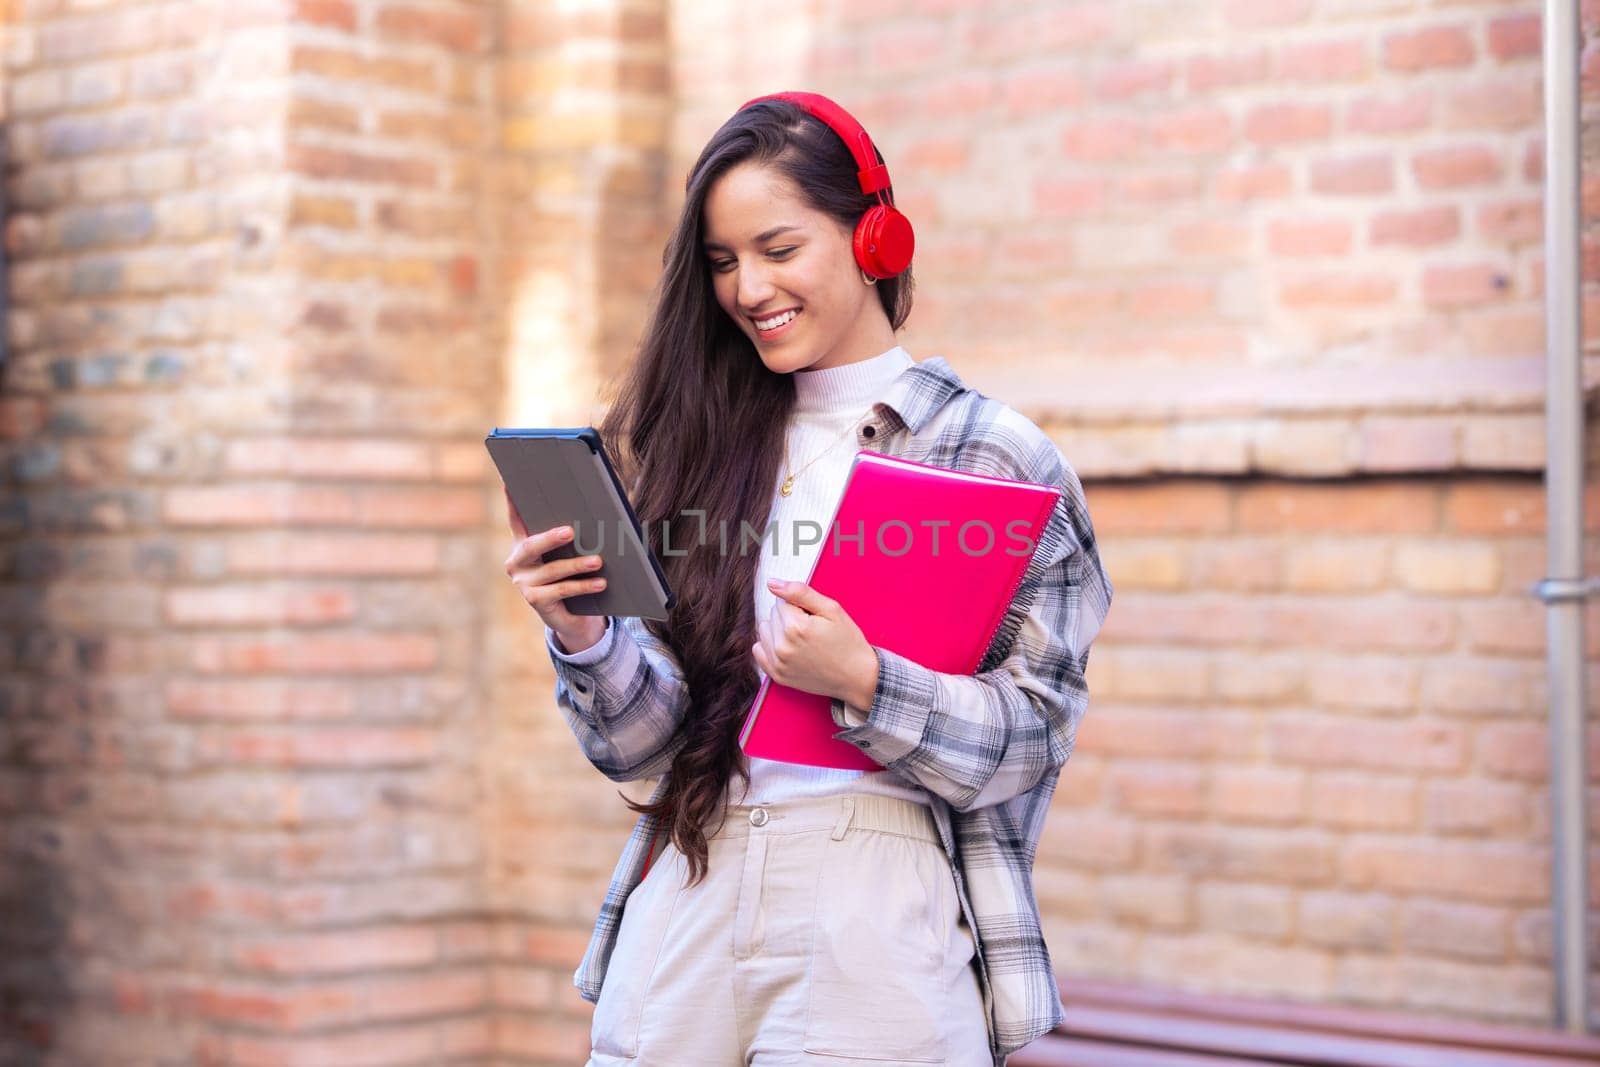 Young smiling student with notebook in hand uses social networks with tablet applications and wireless technology outdoors.